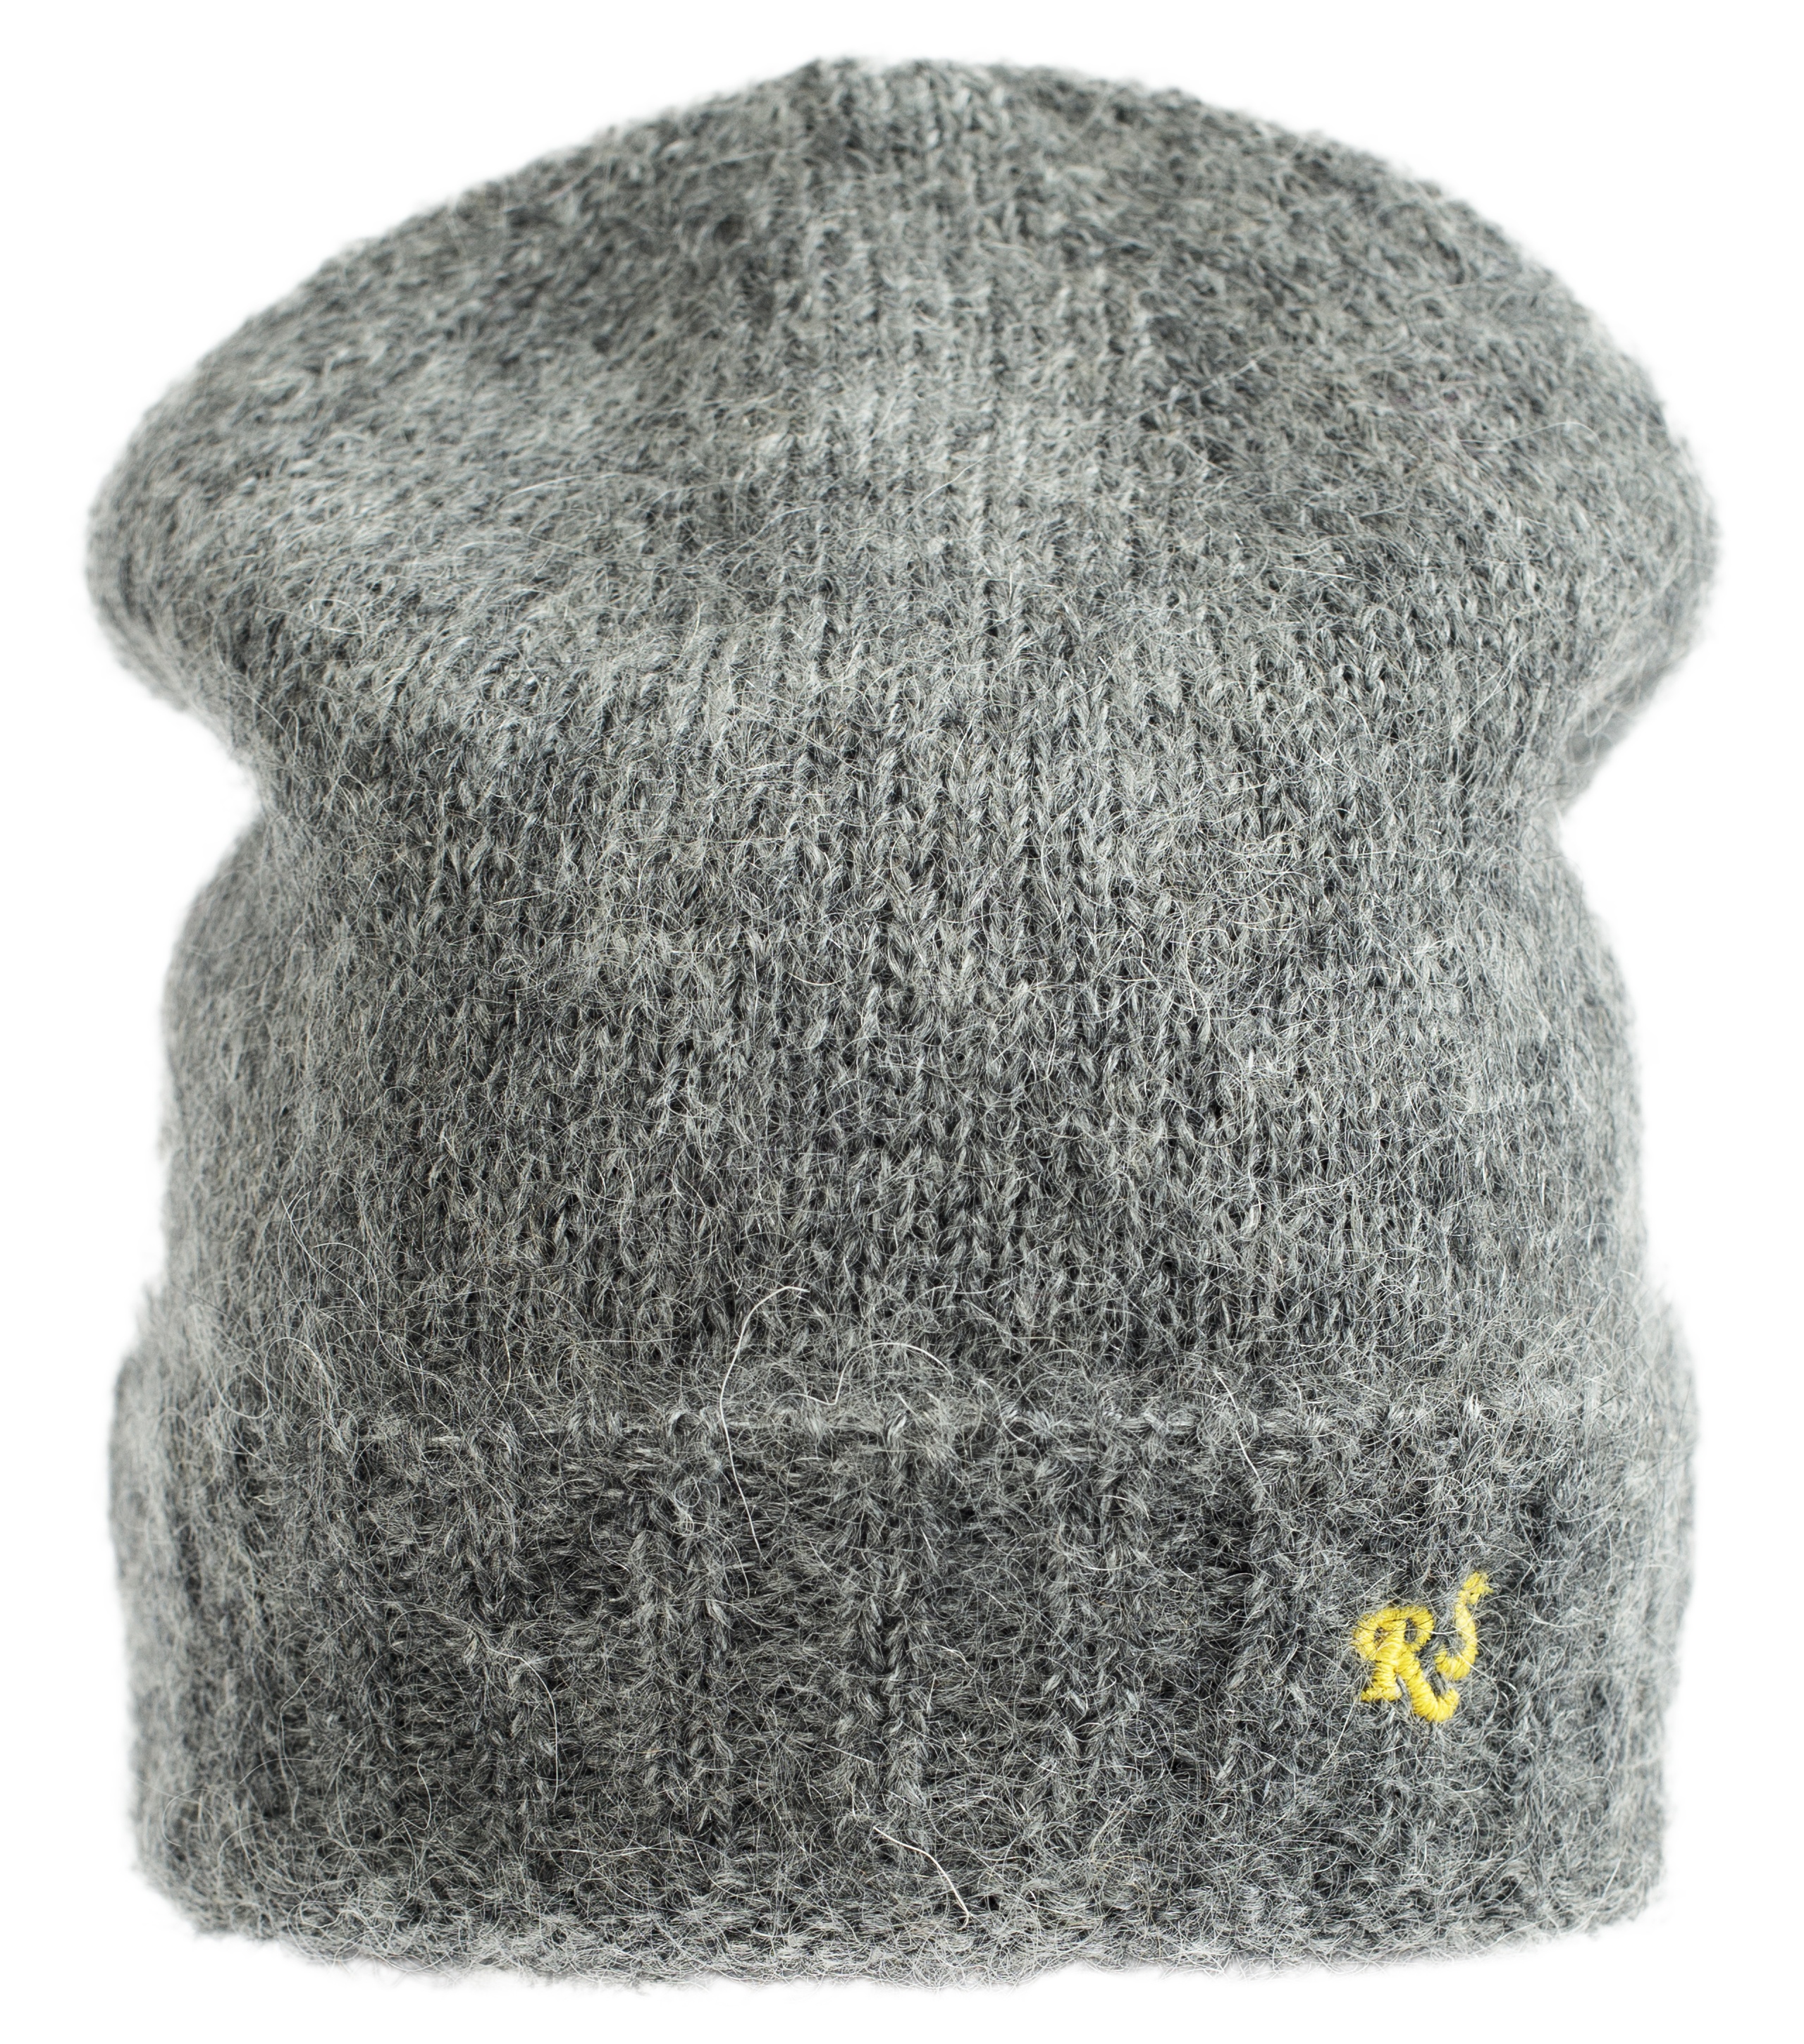 RS KNITTED BEANIE IN GREY - 2